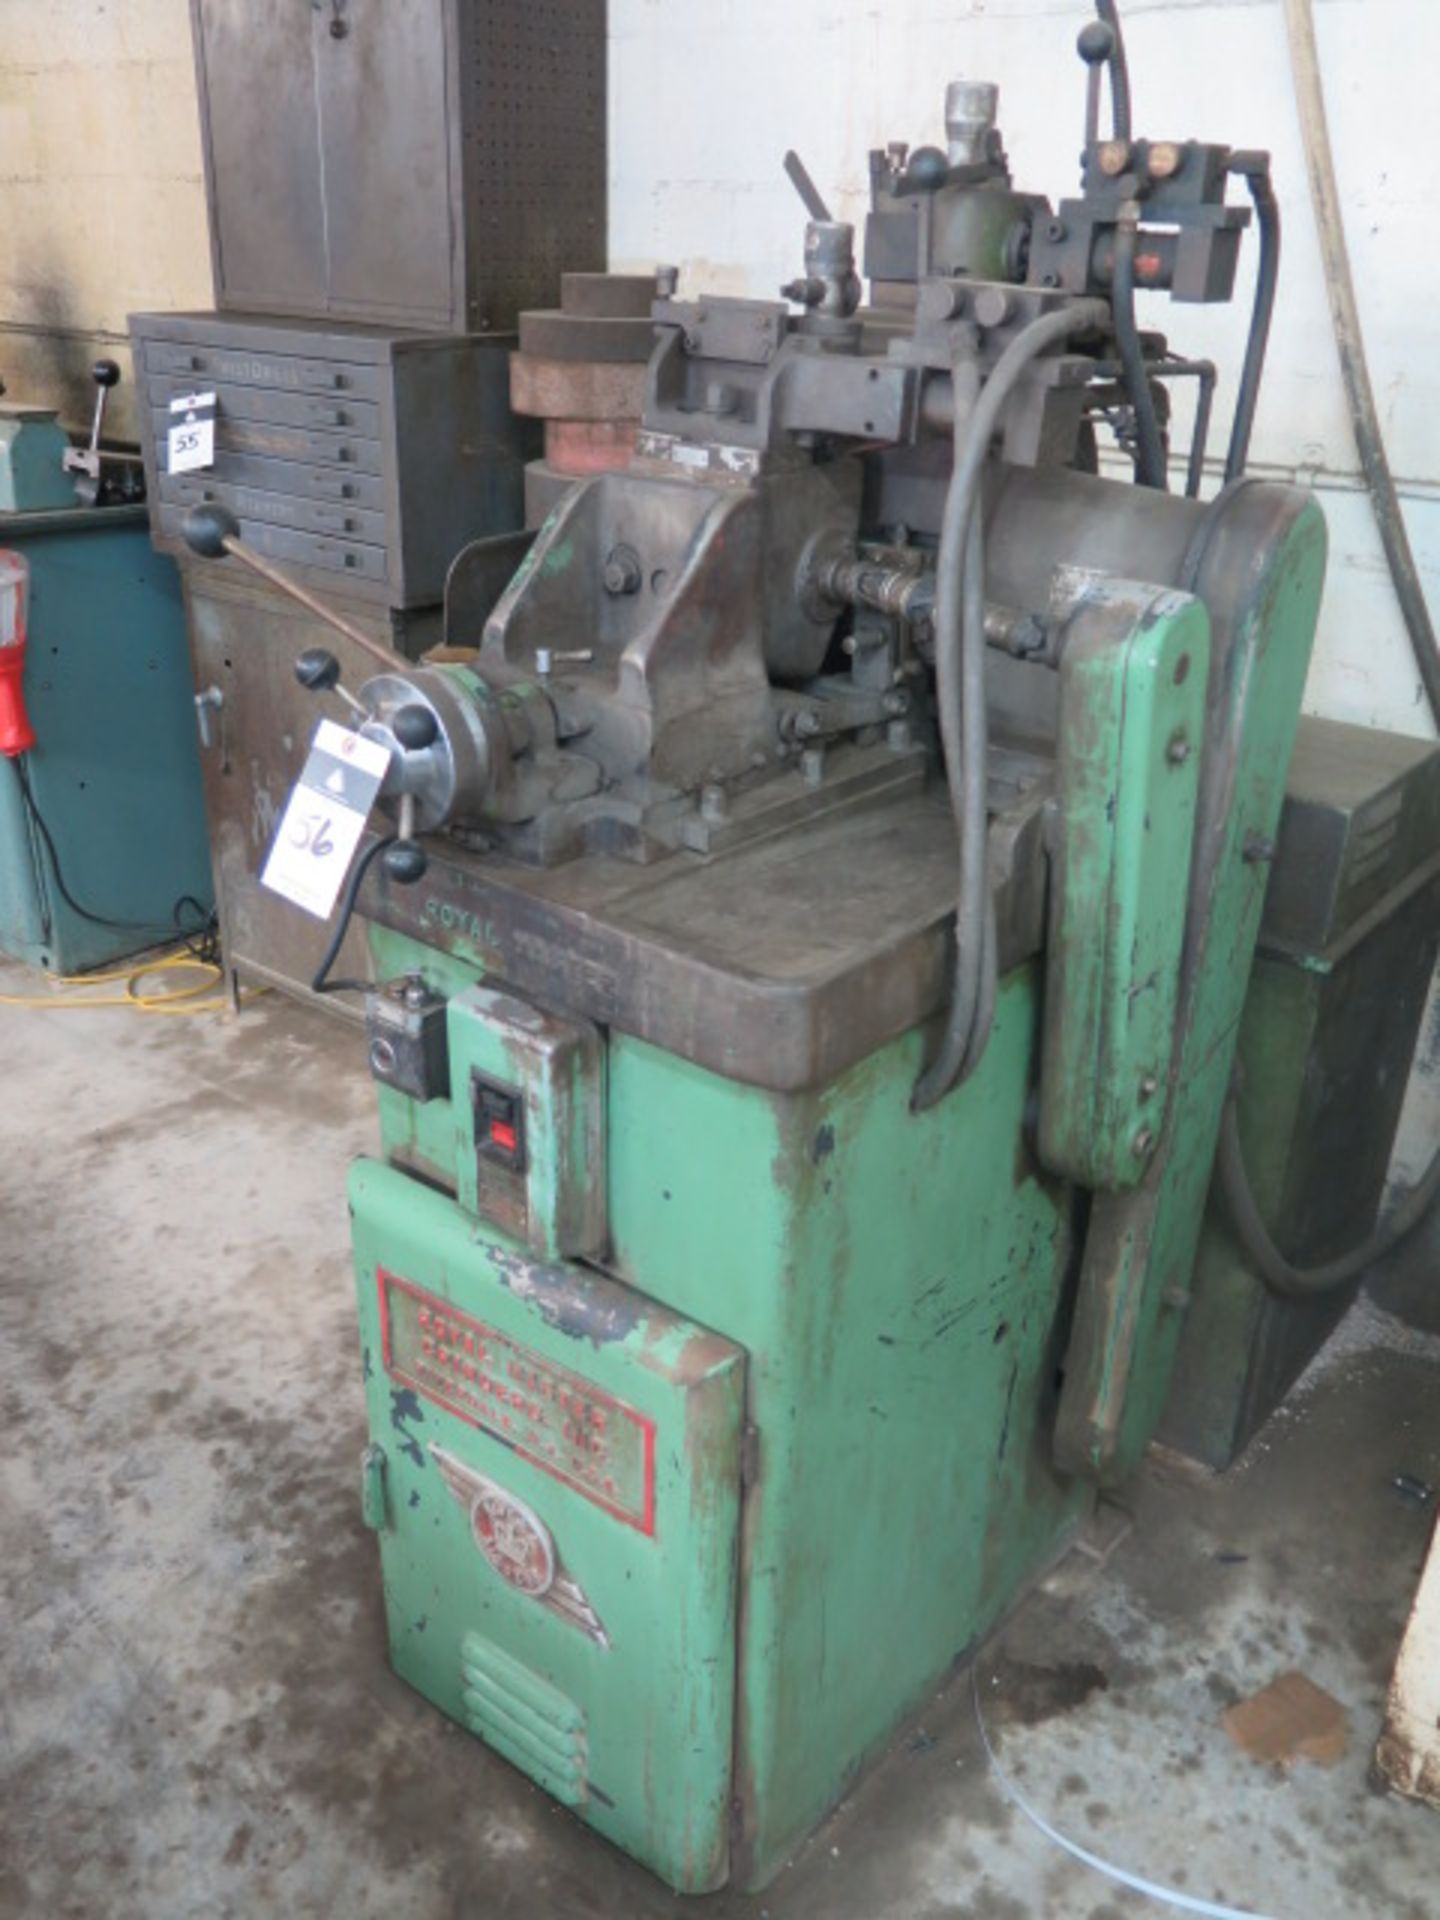 Royal Master TK-12 Centerless Grinder w/ w/ Grinding Wheel and Feed Wheel Dressers, Coolant - Image 2 of 8